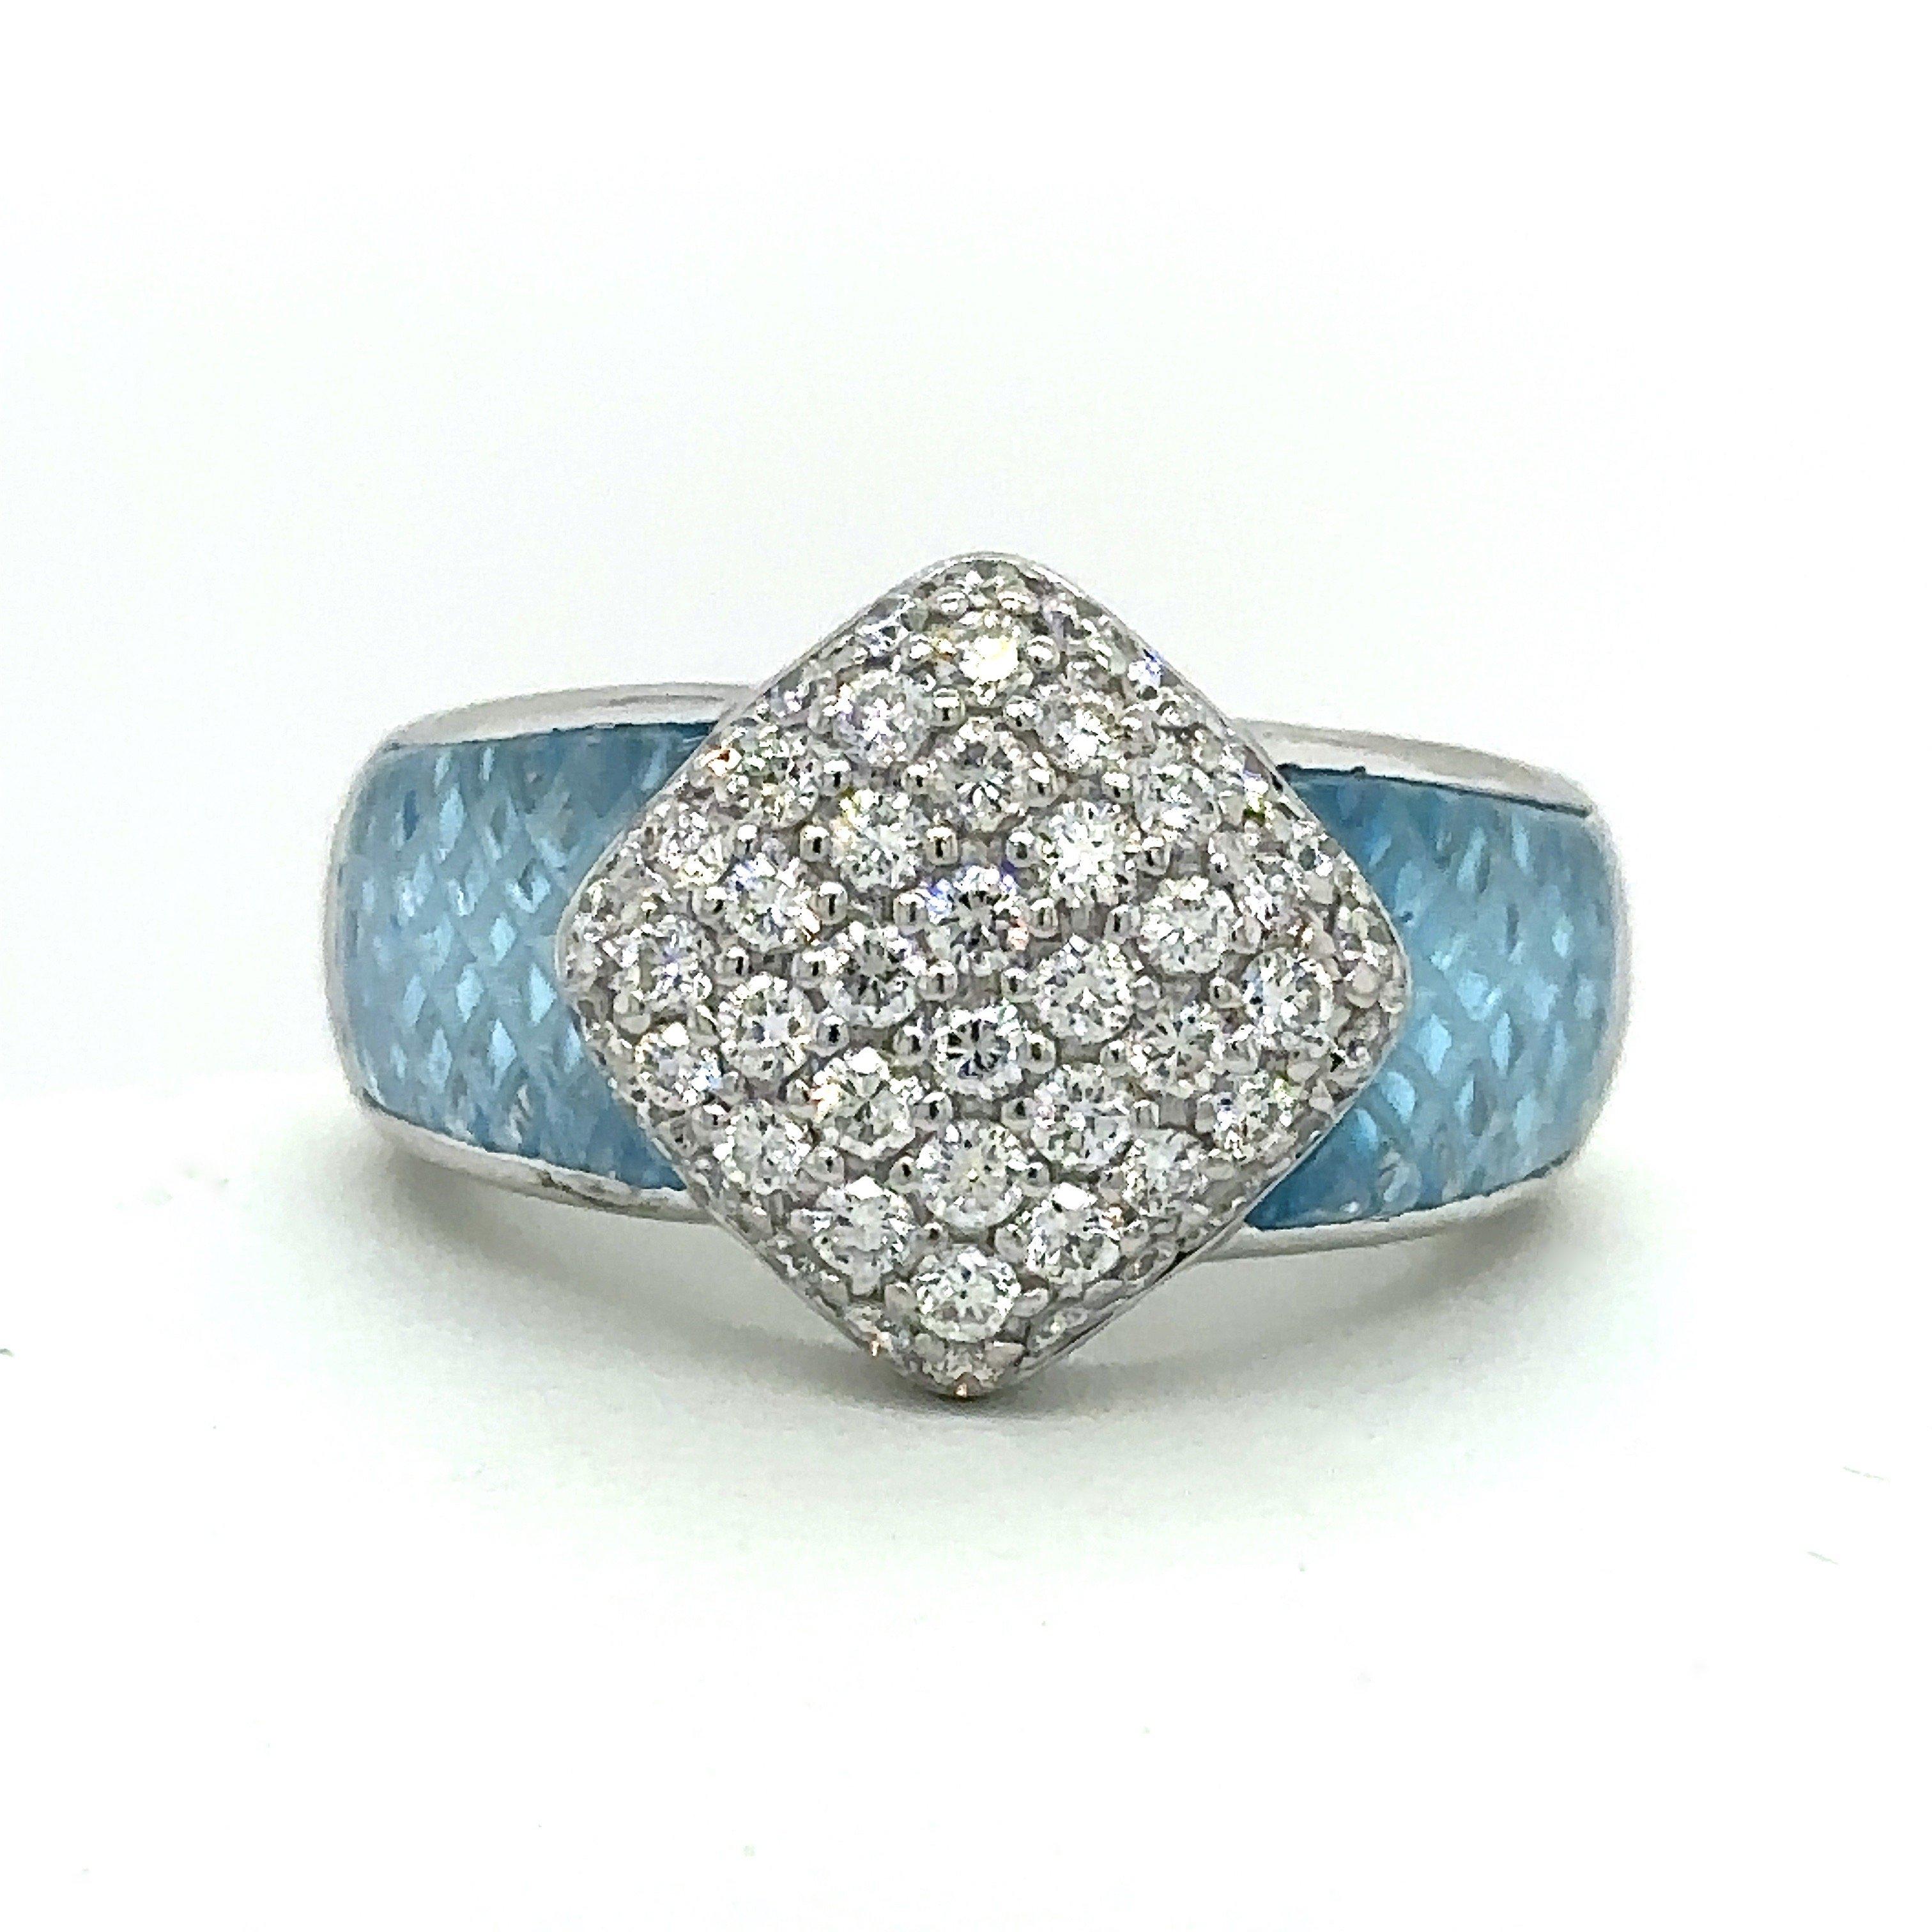 This 18KT white gold ring was designed by Robert Wander for WINC creations. It features approximately 1.25CT round diamond surrounded by blue topaz with a unique lattice carved design. The diamond front of the ring measures 14mm and the shank tapers